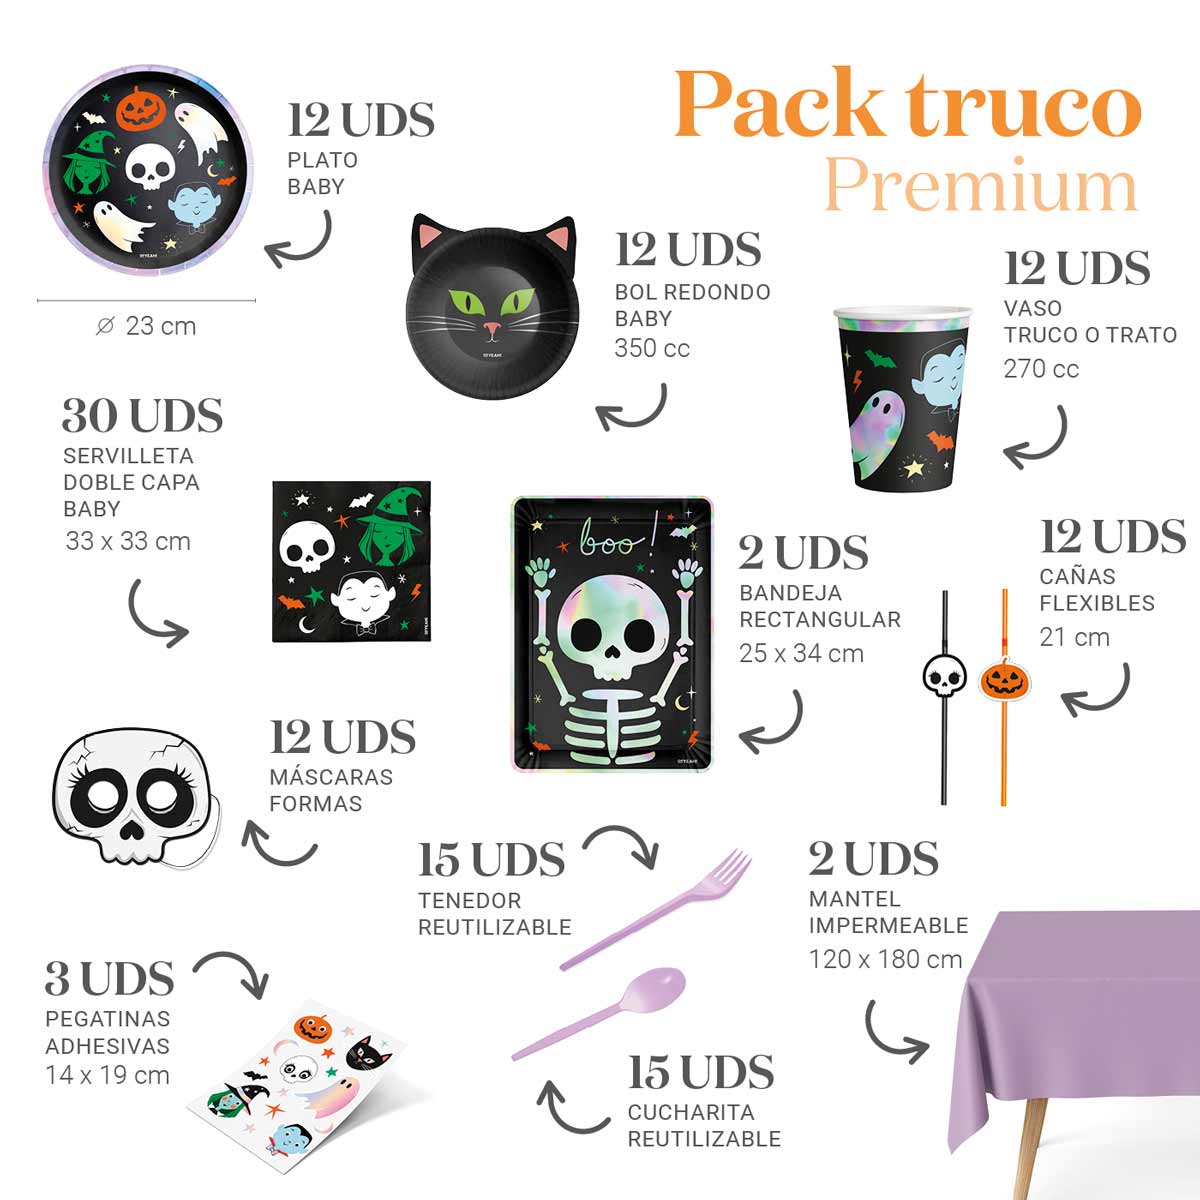 Premium Table Kit Truco or treatment 12 people